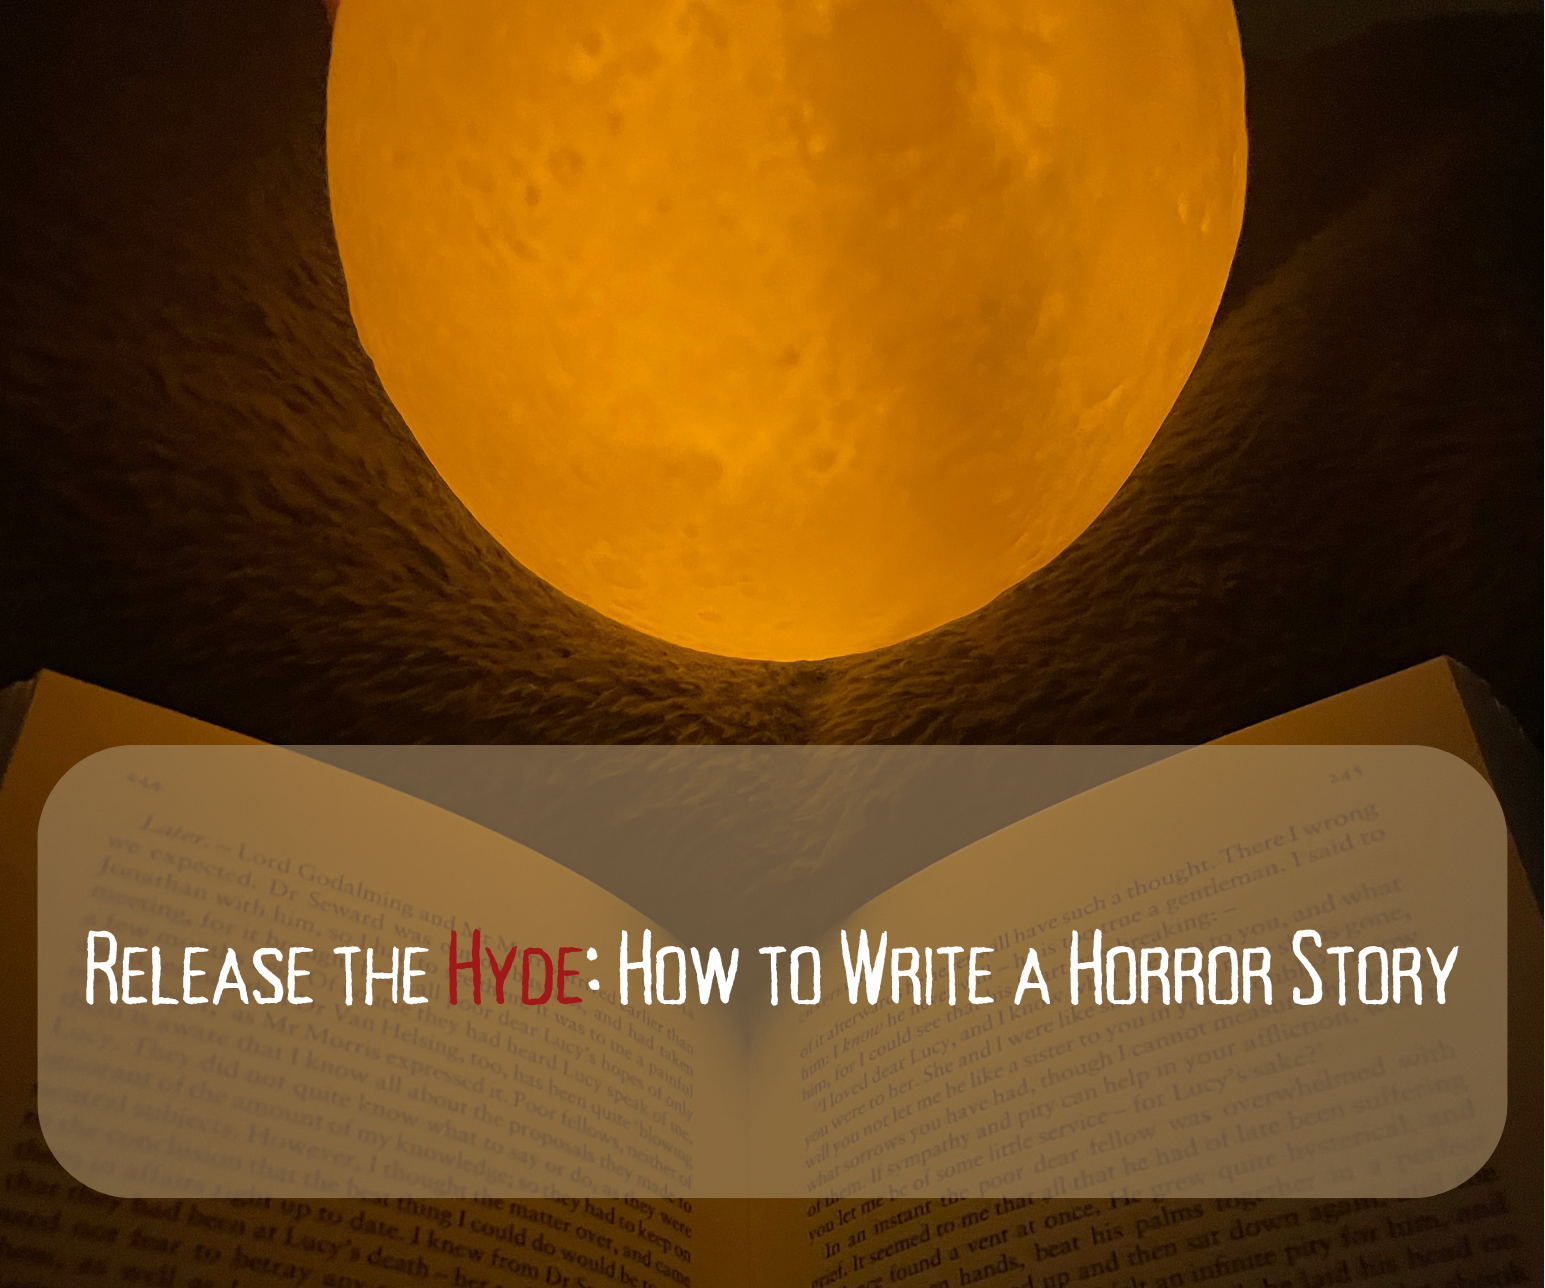 Release the Hyde: How to Write a Horror Story